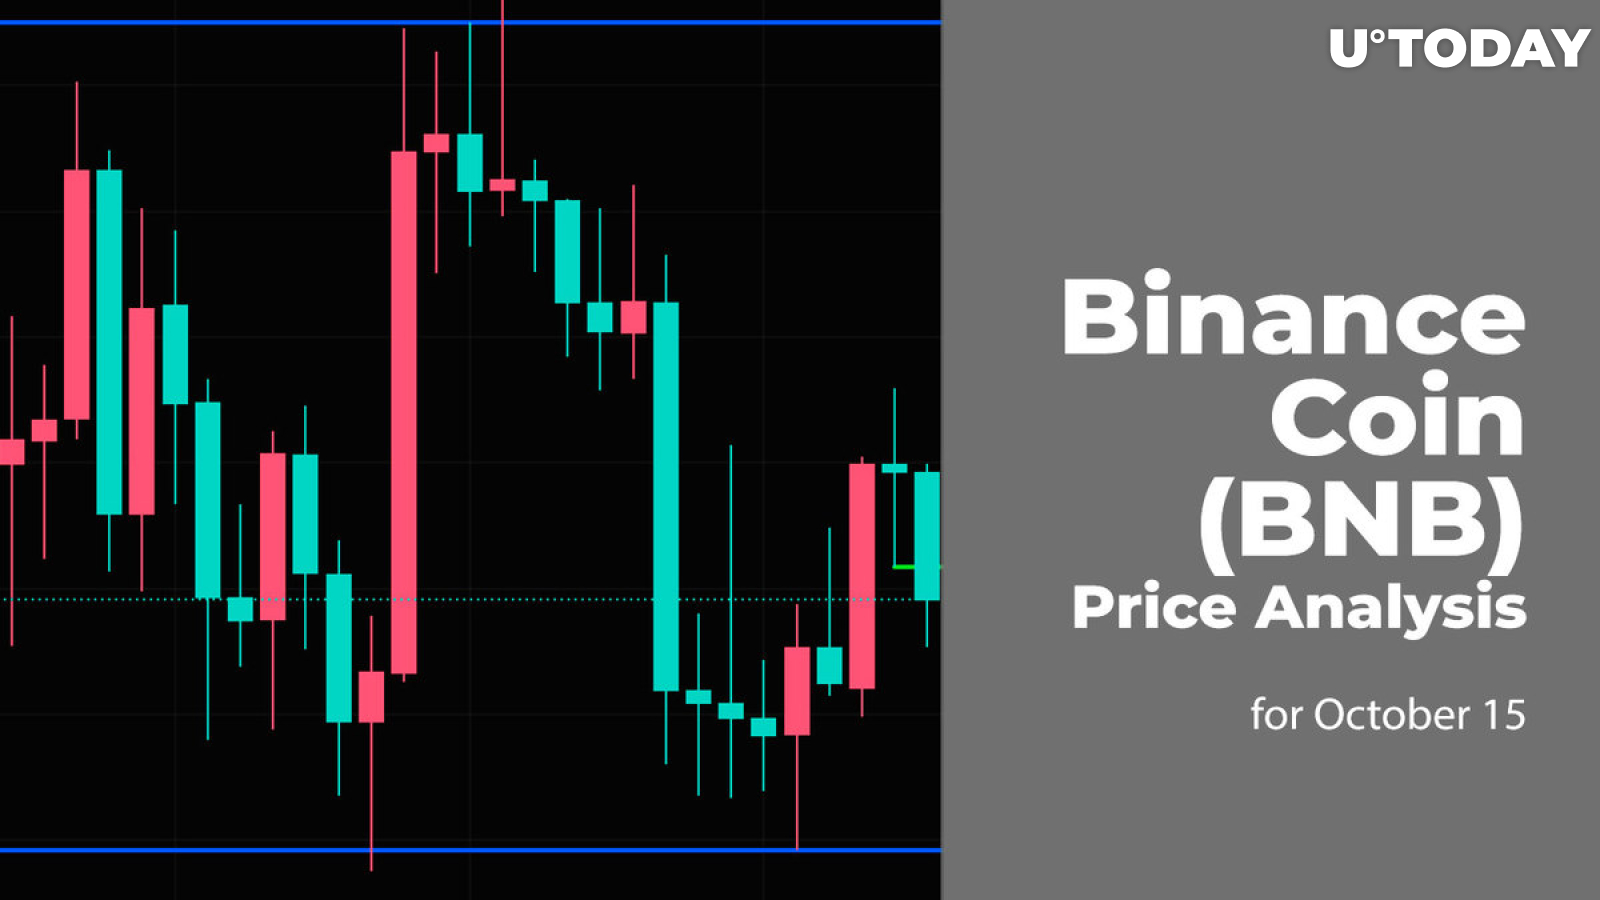 Binance Coin (BNB) Price Analysis for October 15